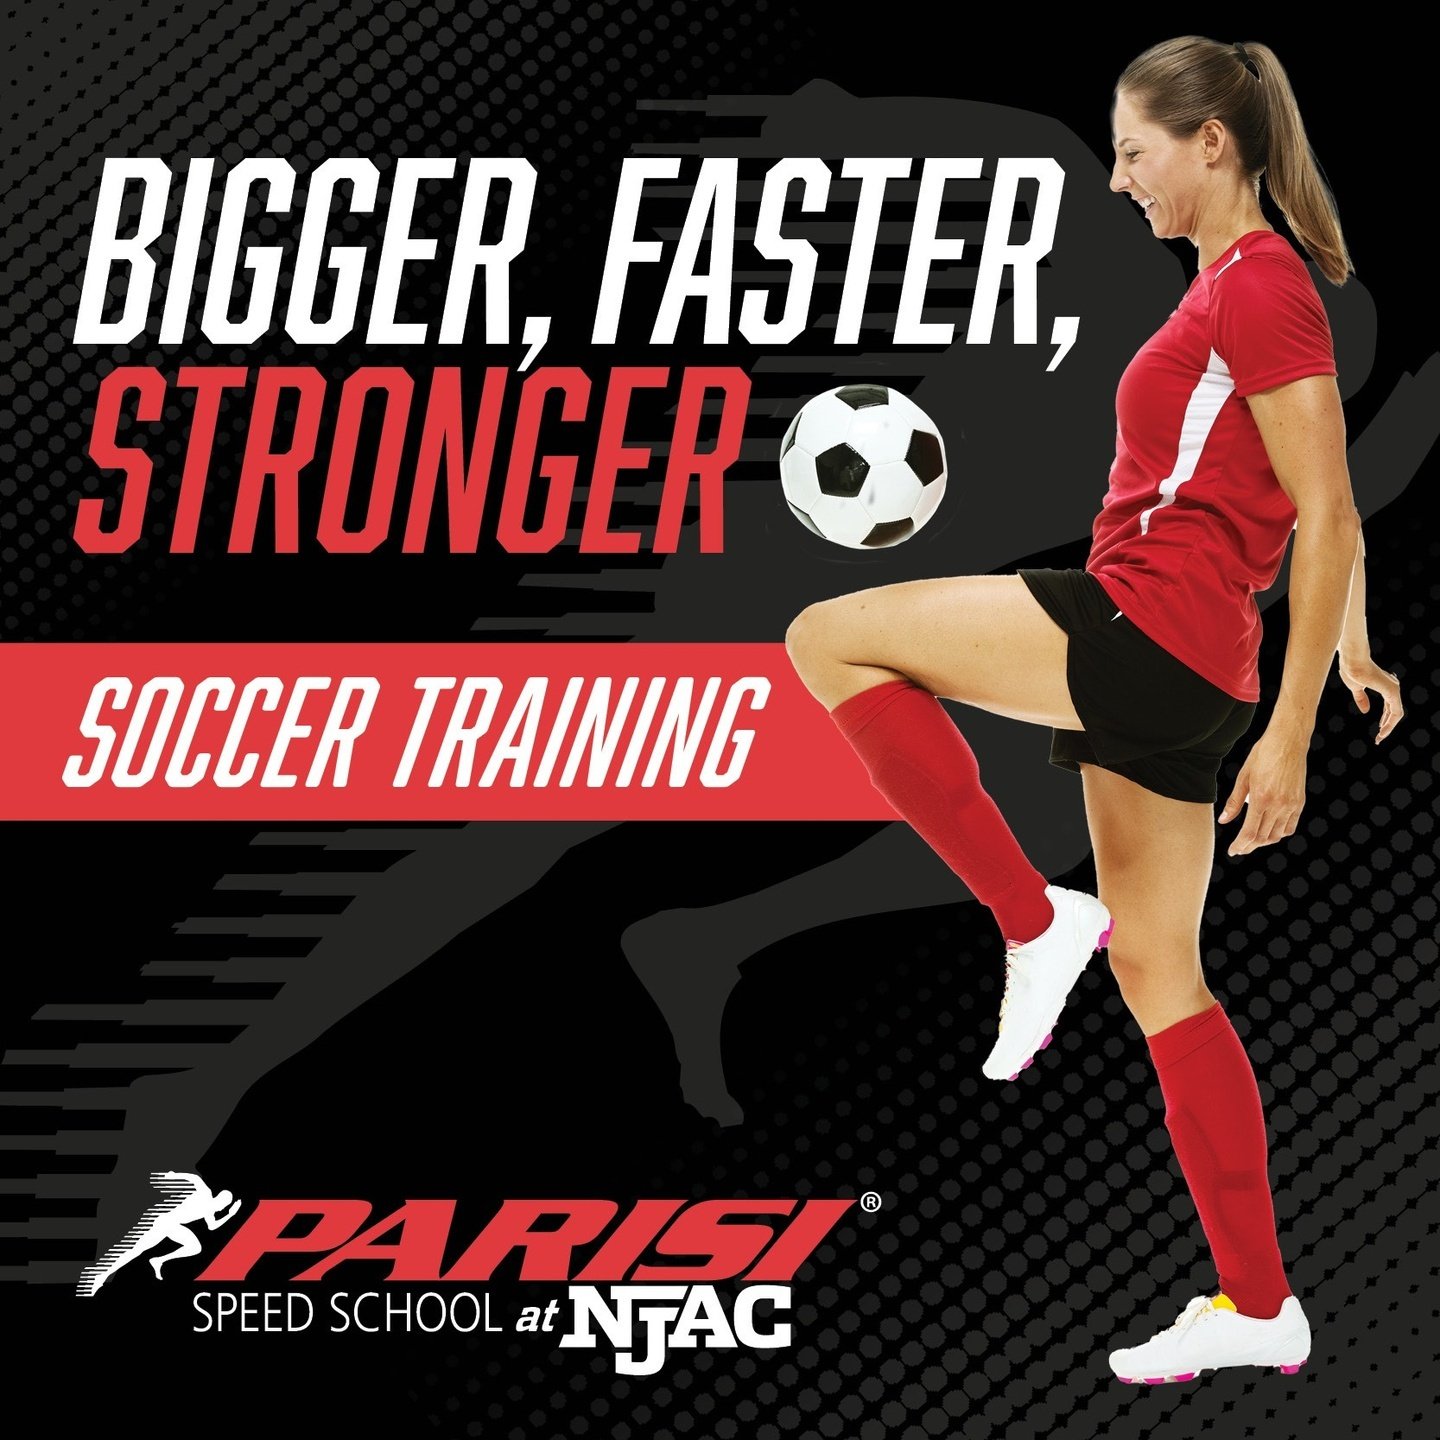 Sports-specific training that delivers results. Discover how Parisi Speed School at NJAC can help you increase speed and agility for the upcoming season! Visit Parisi Speed School at NJAC: https://www.njac.com/parisi